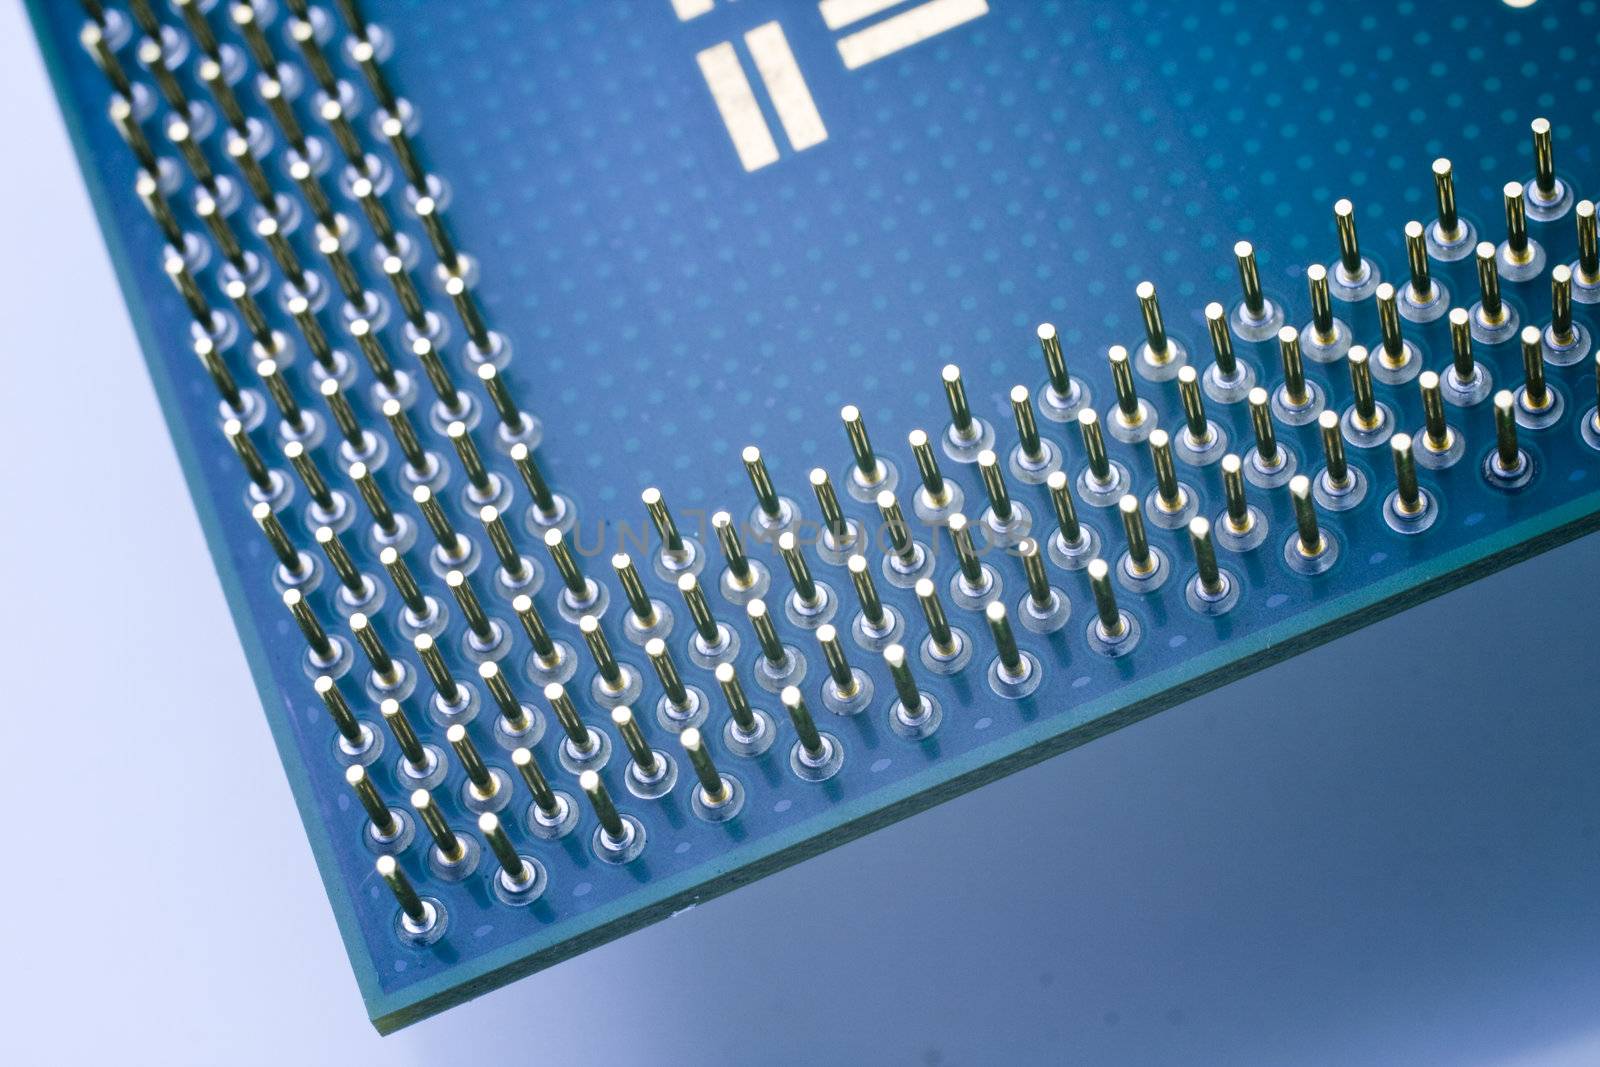 Silicone chip CPU  on white background.I use the blue style to show the high tech feeling.